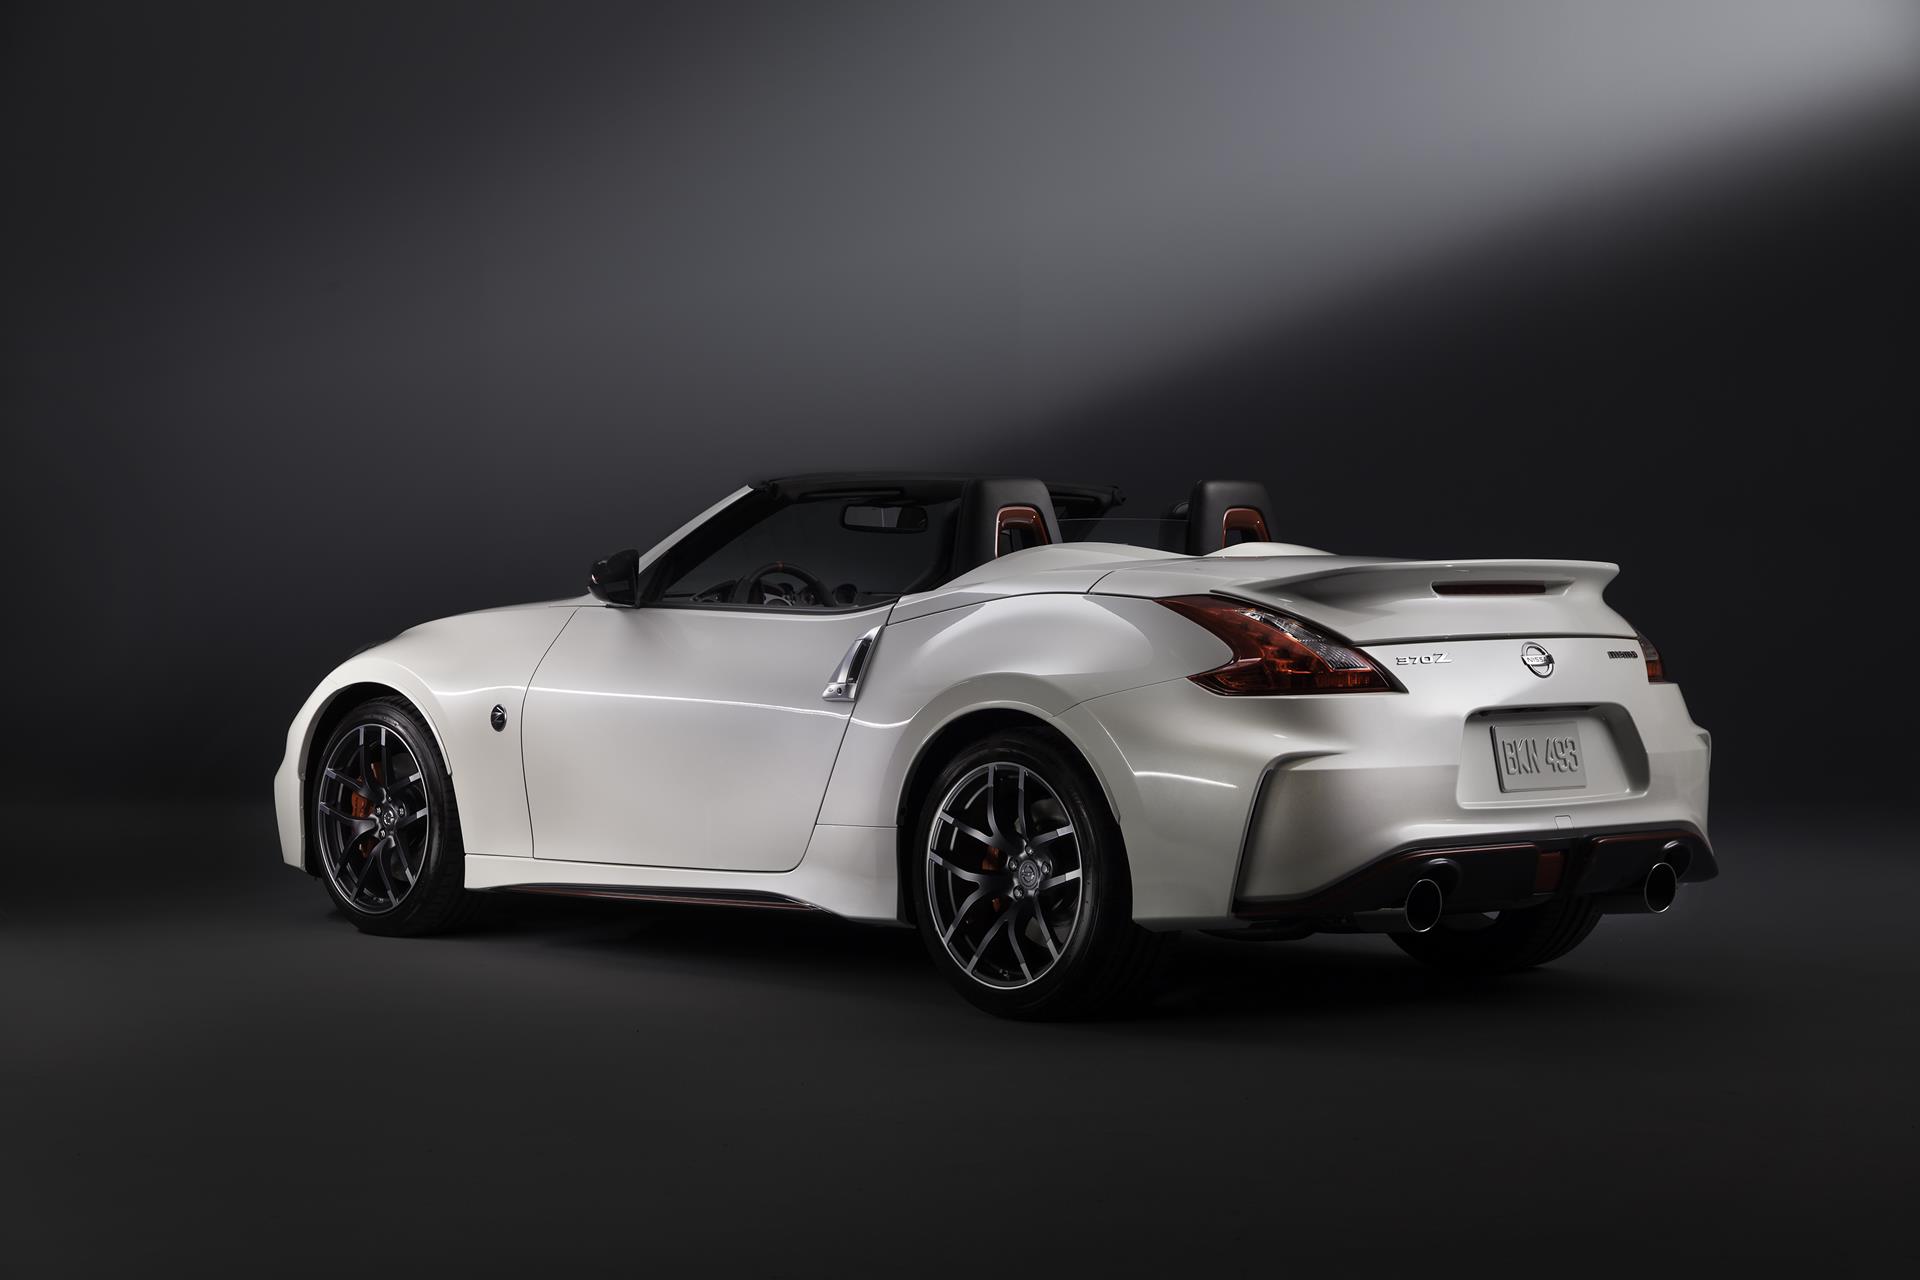 2015 Nissan 370Z NISMO Roadster Concept